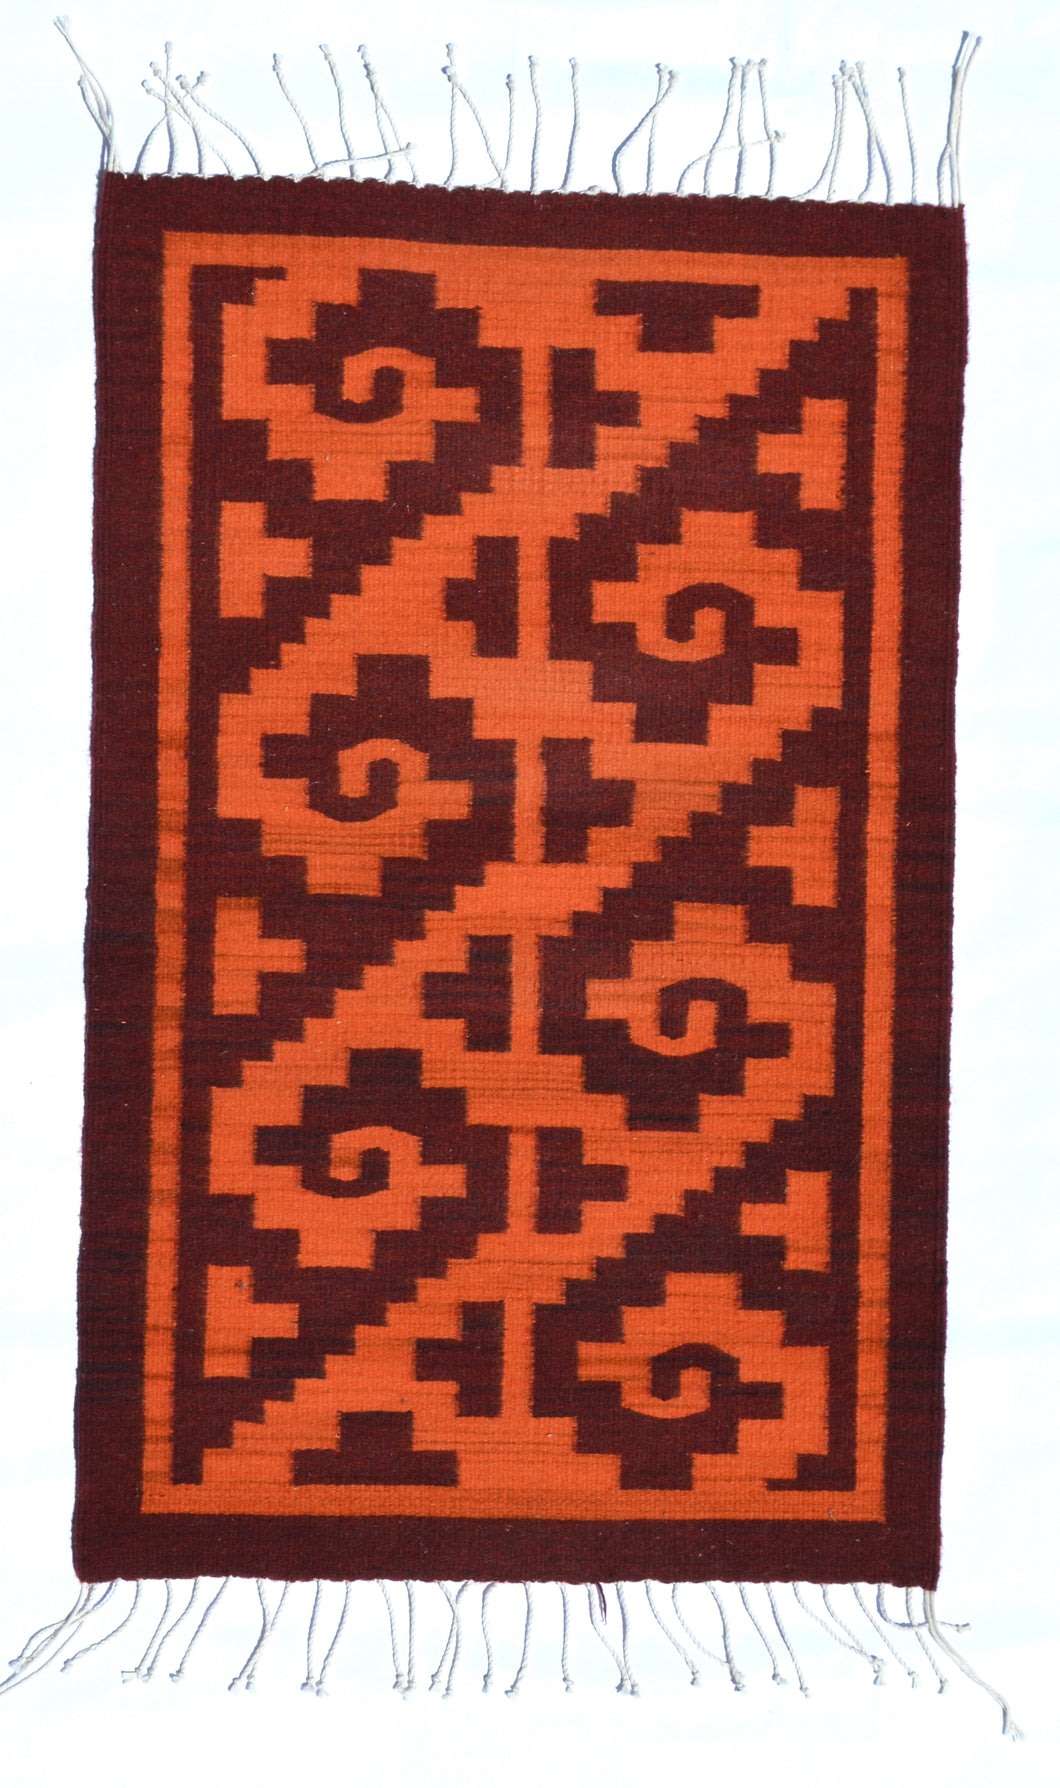 Olas in Red Handwoven Rug